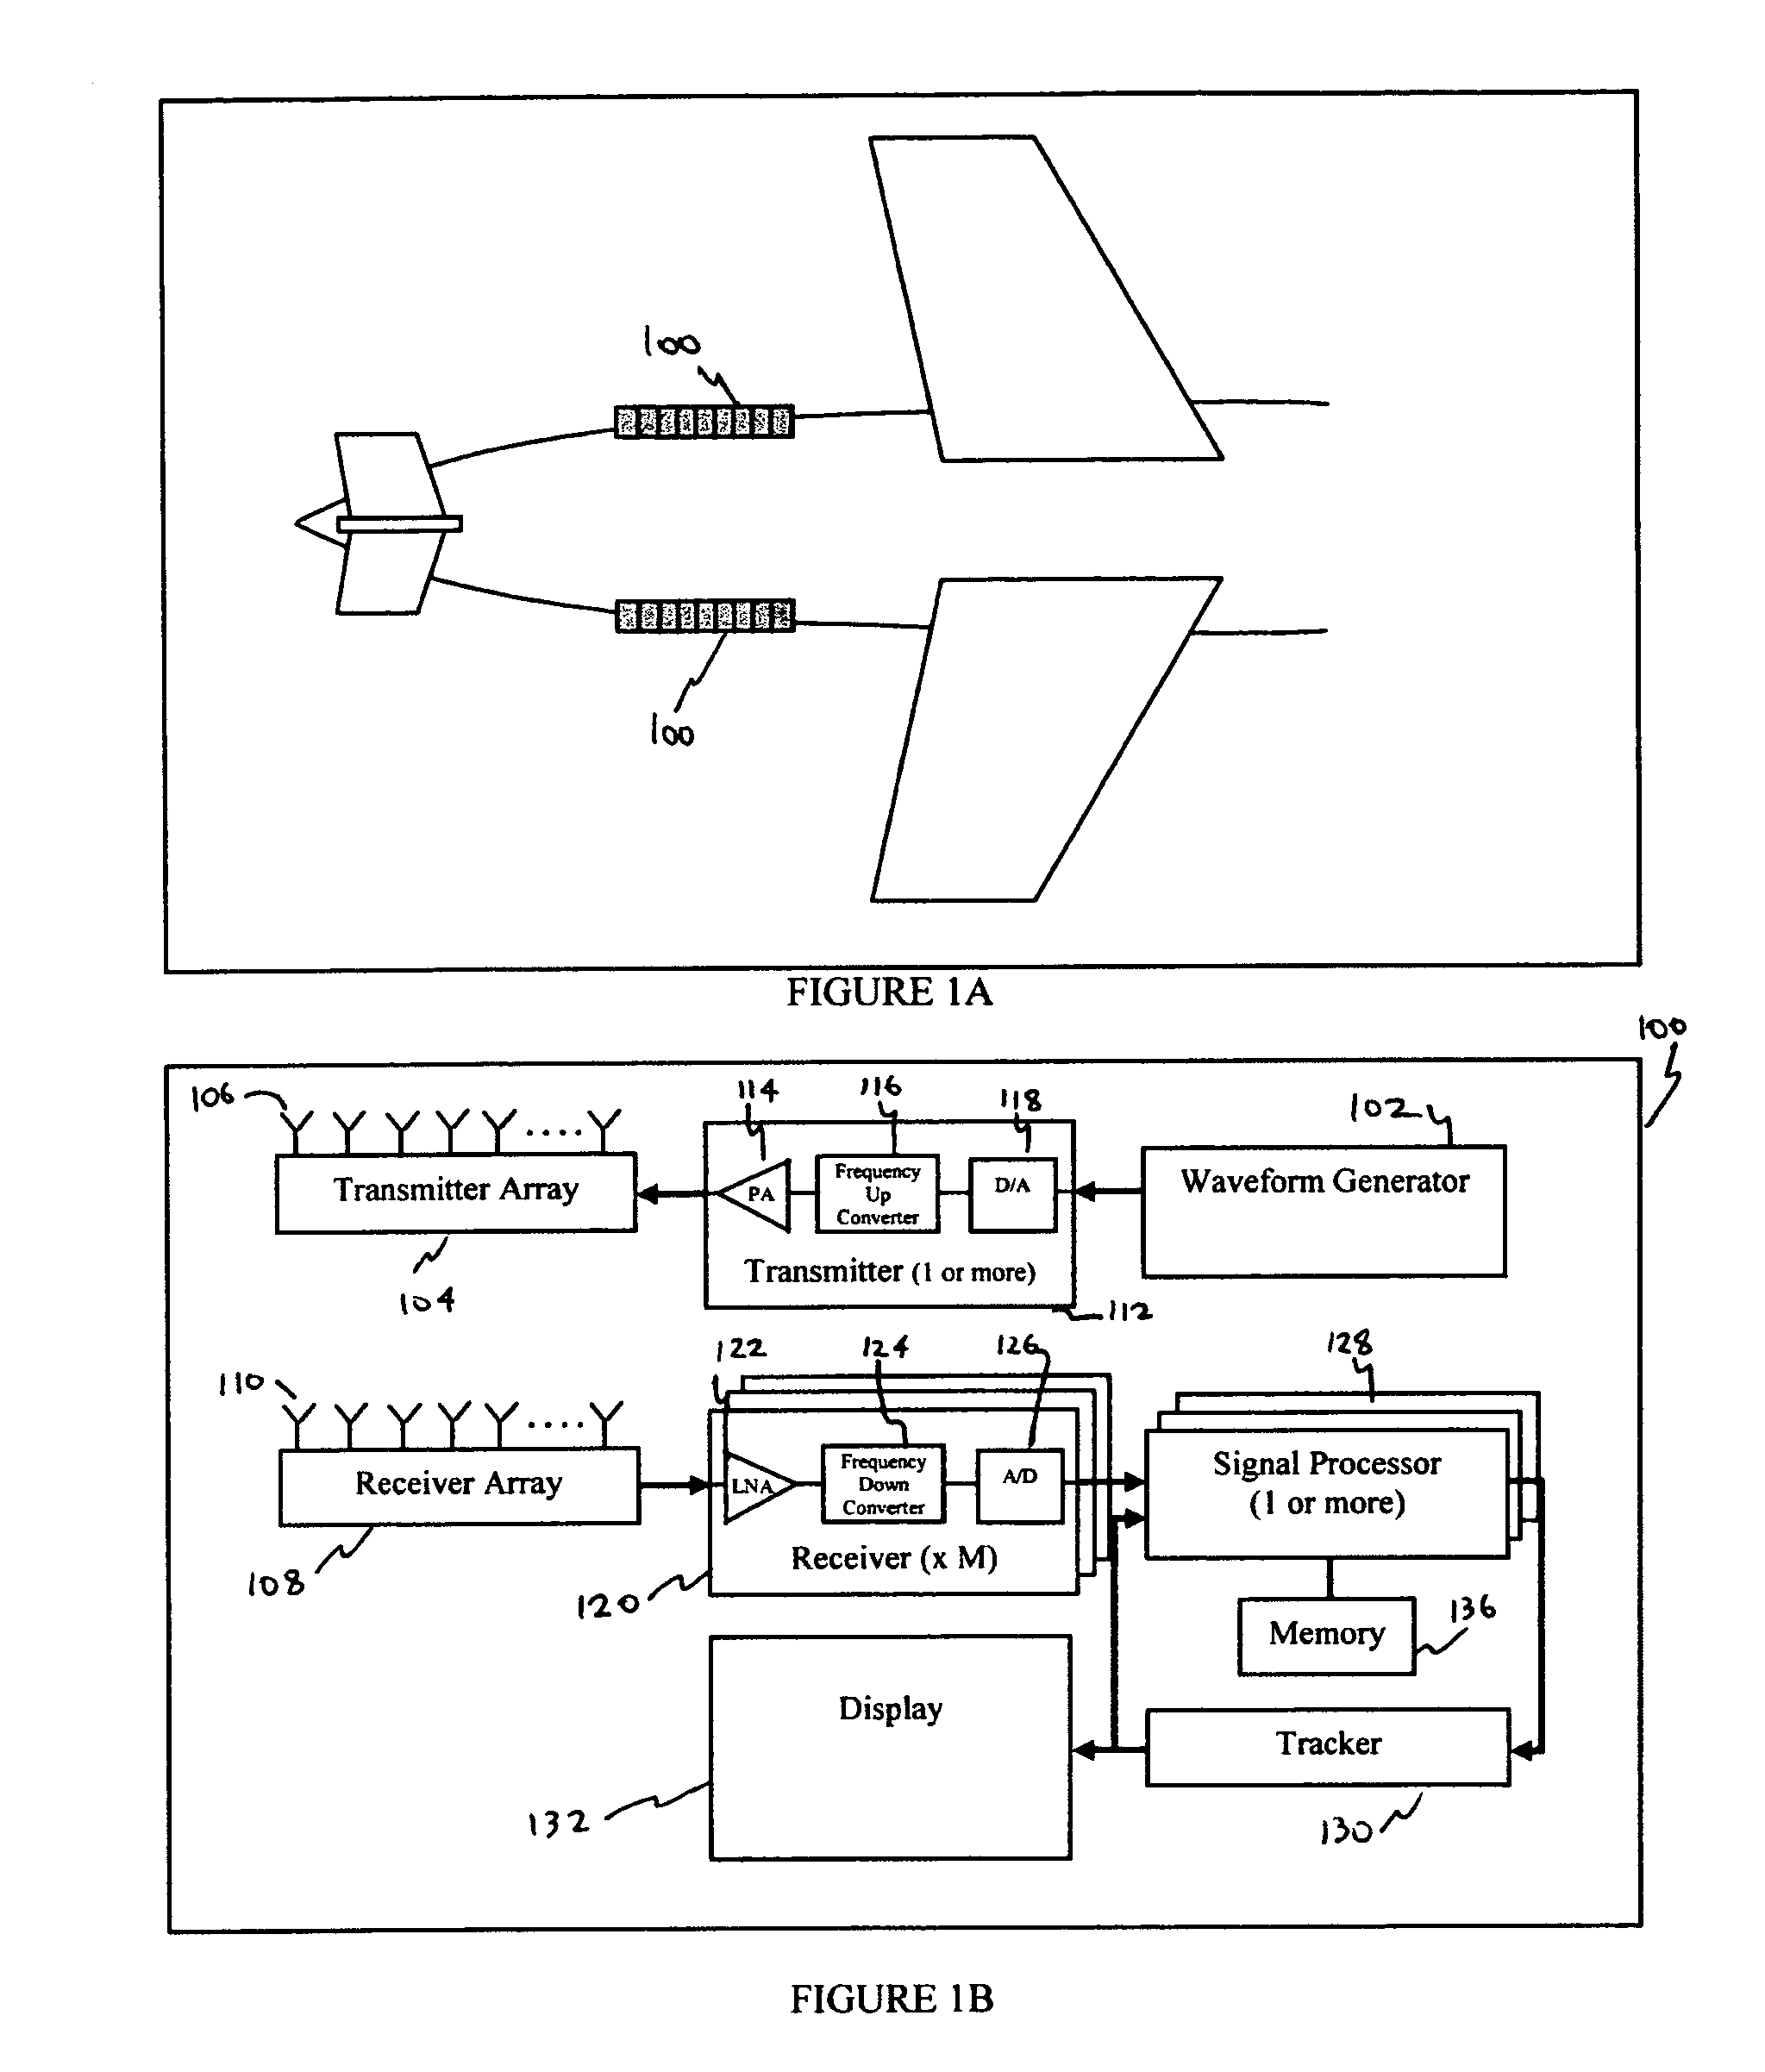 System and method for detection and discrimination of targets in the presence of interference